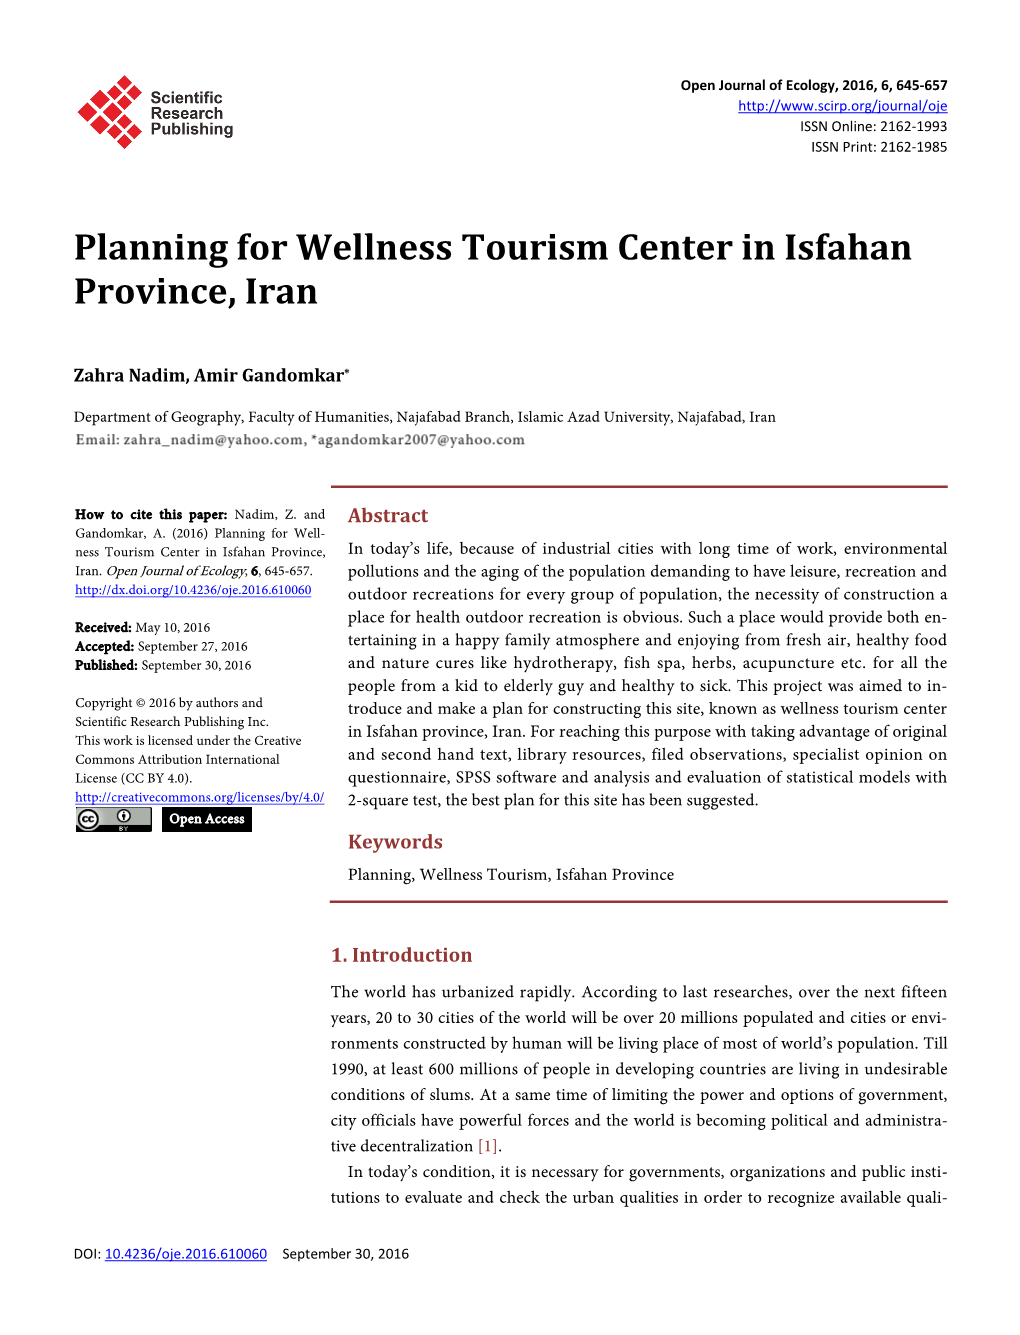 Planning for Wellness Tourism Center in Isfahan Province, Iran